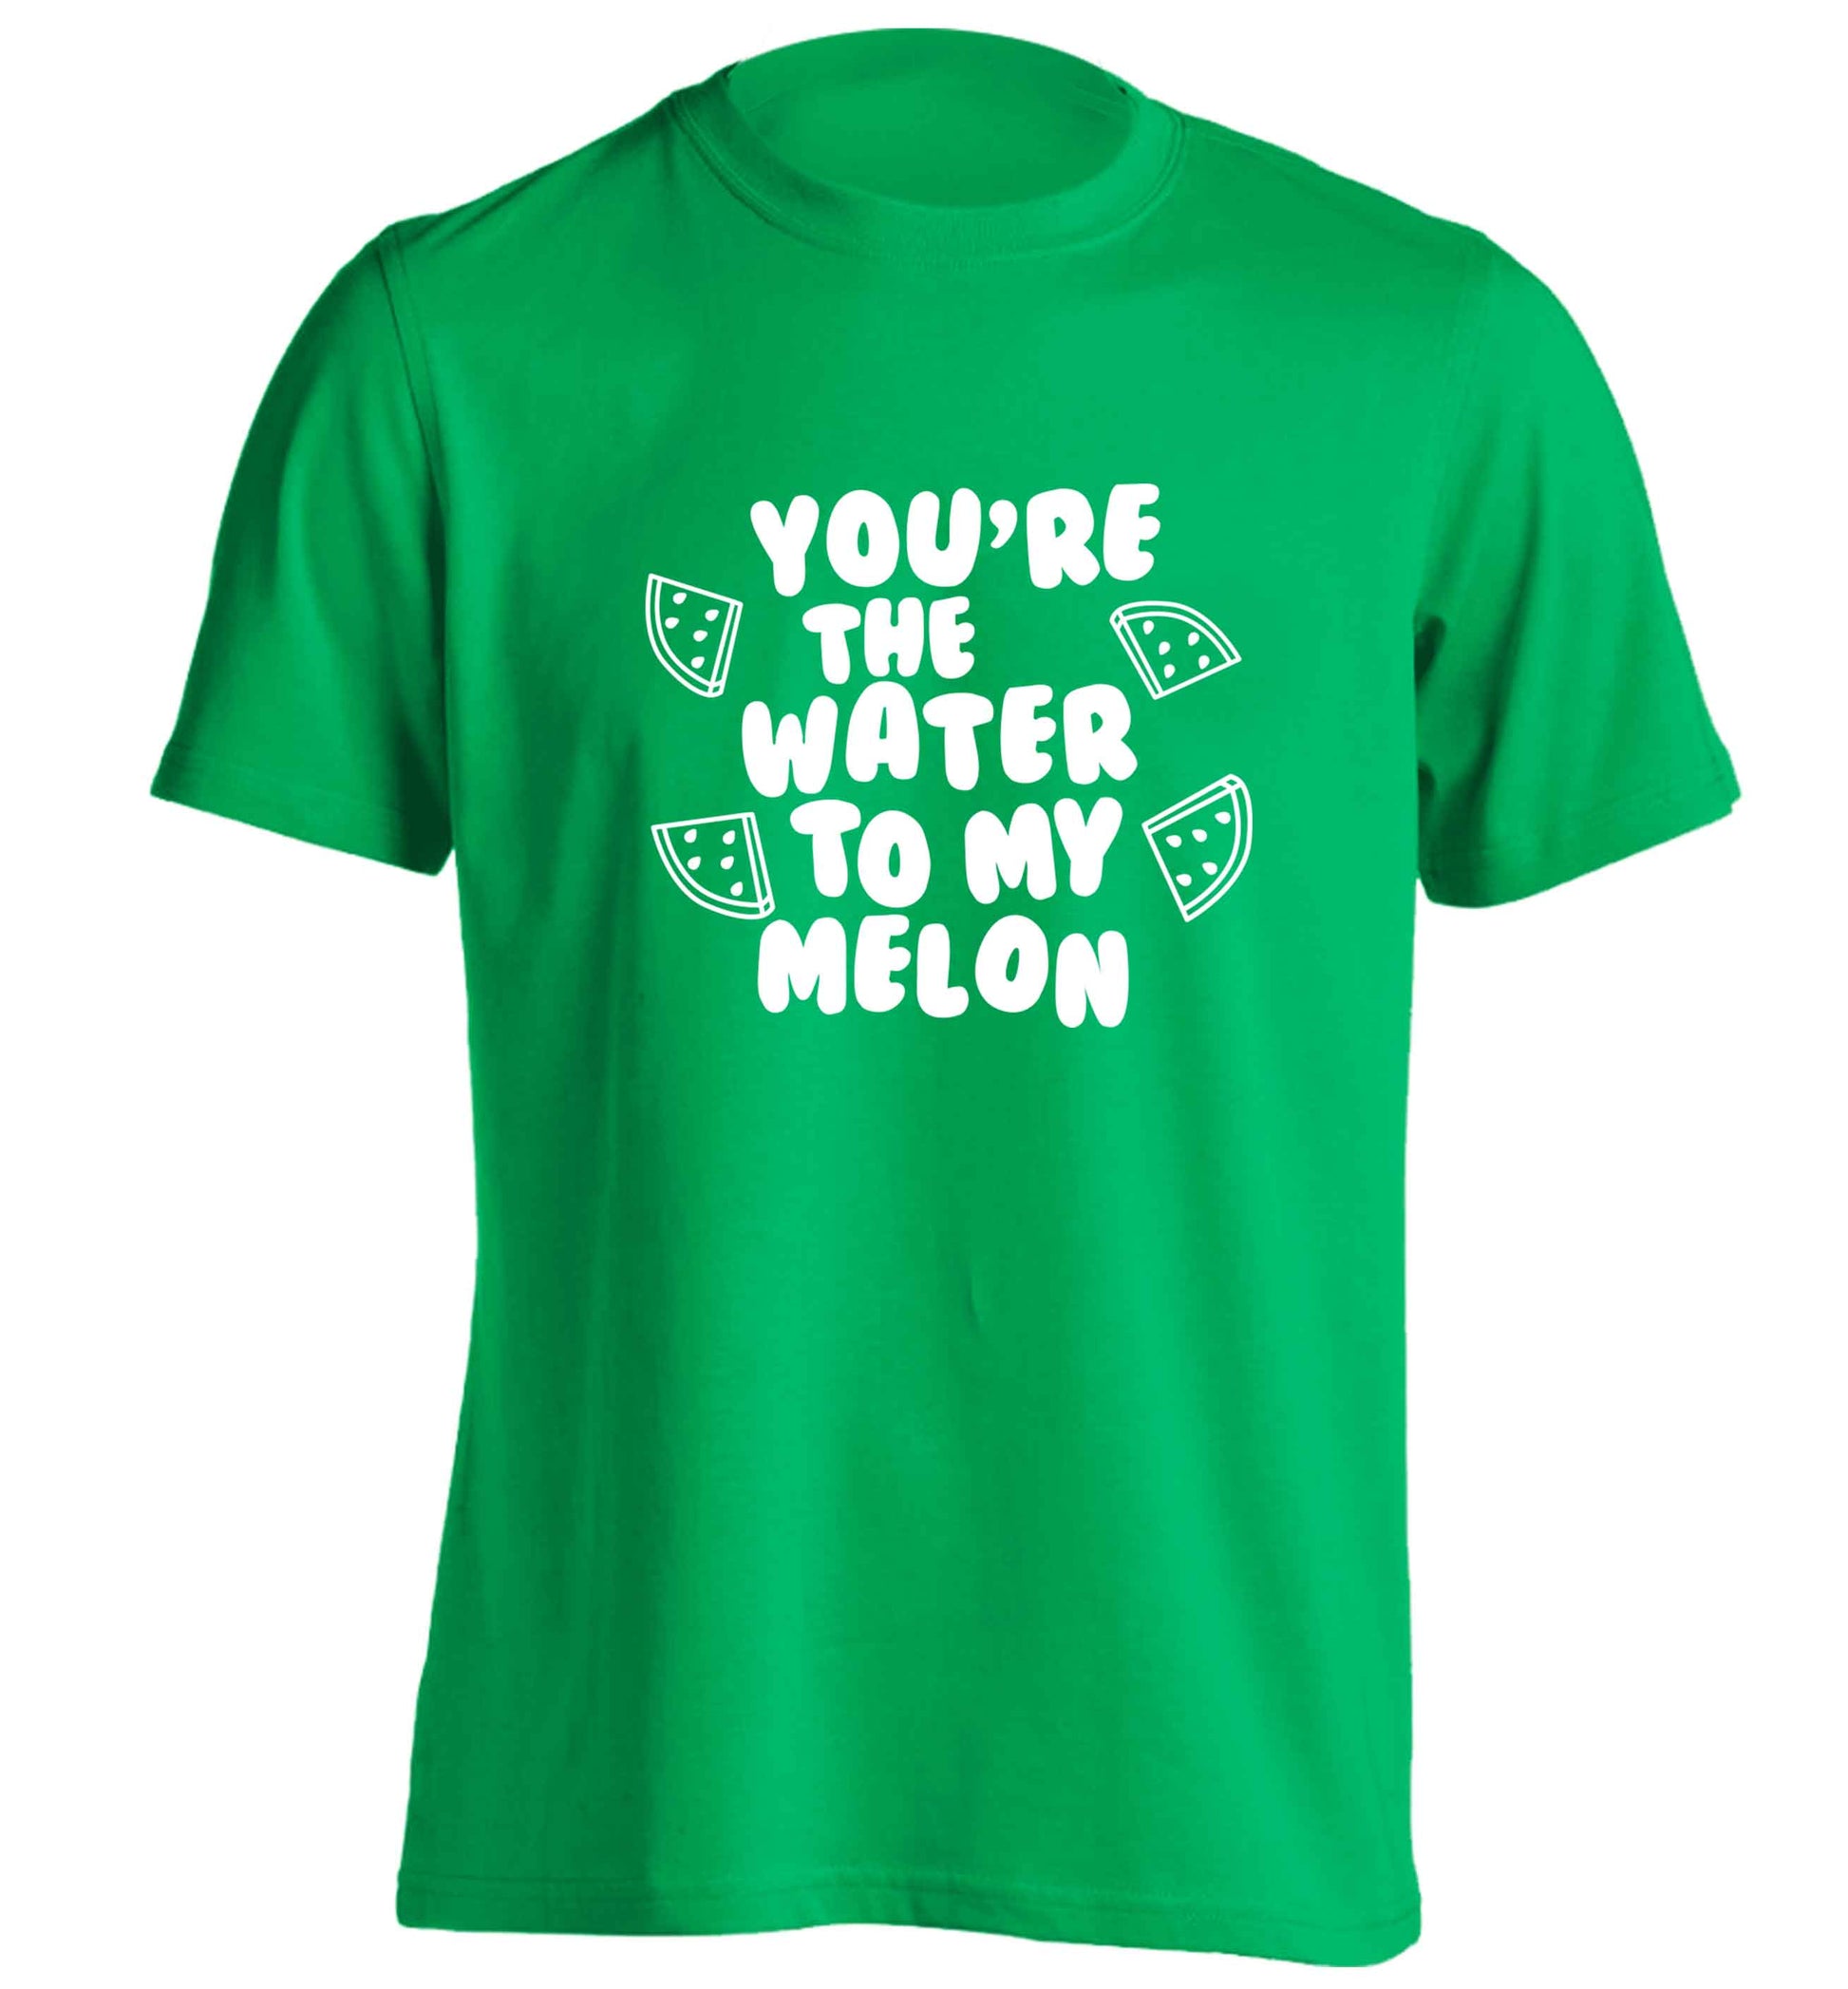 You're the water to my melon adults unisex green Tshirt 2XL